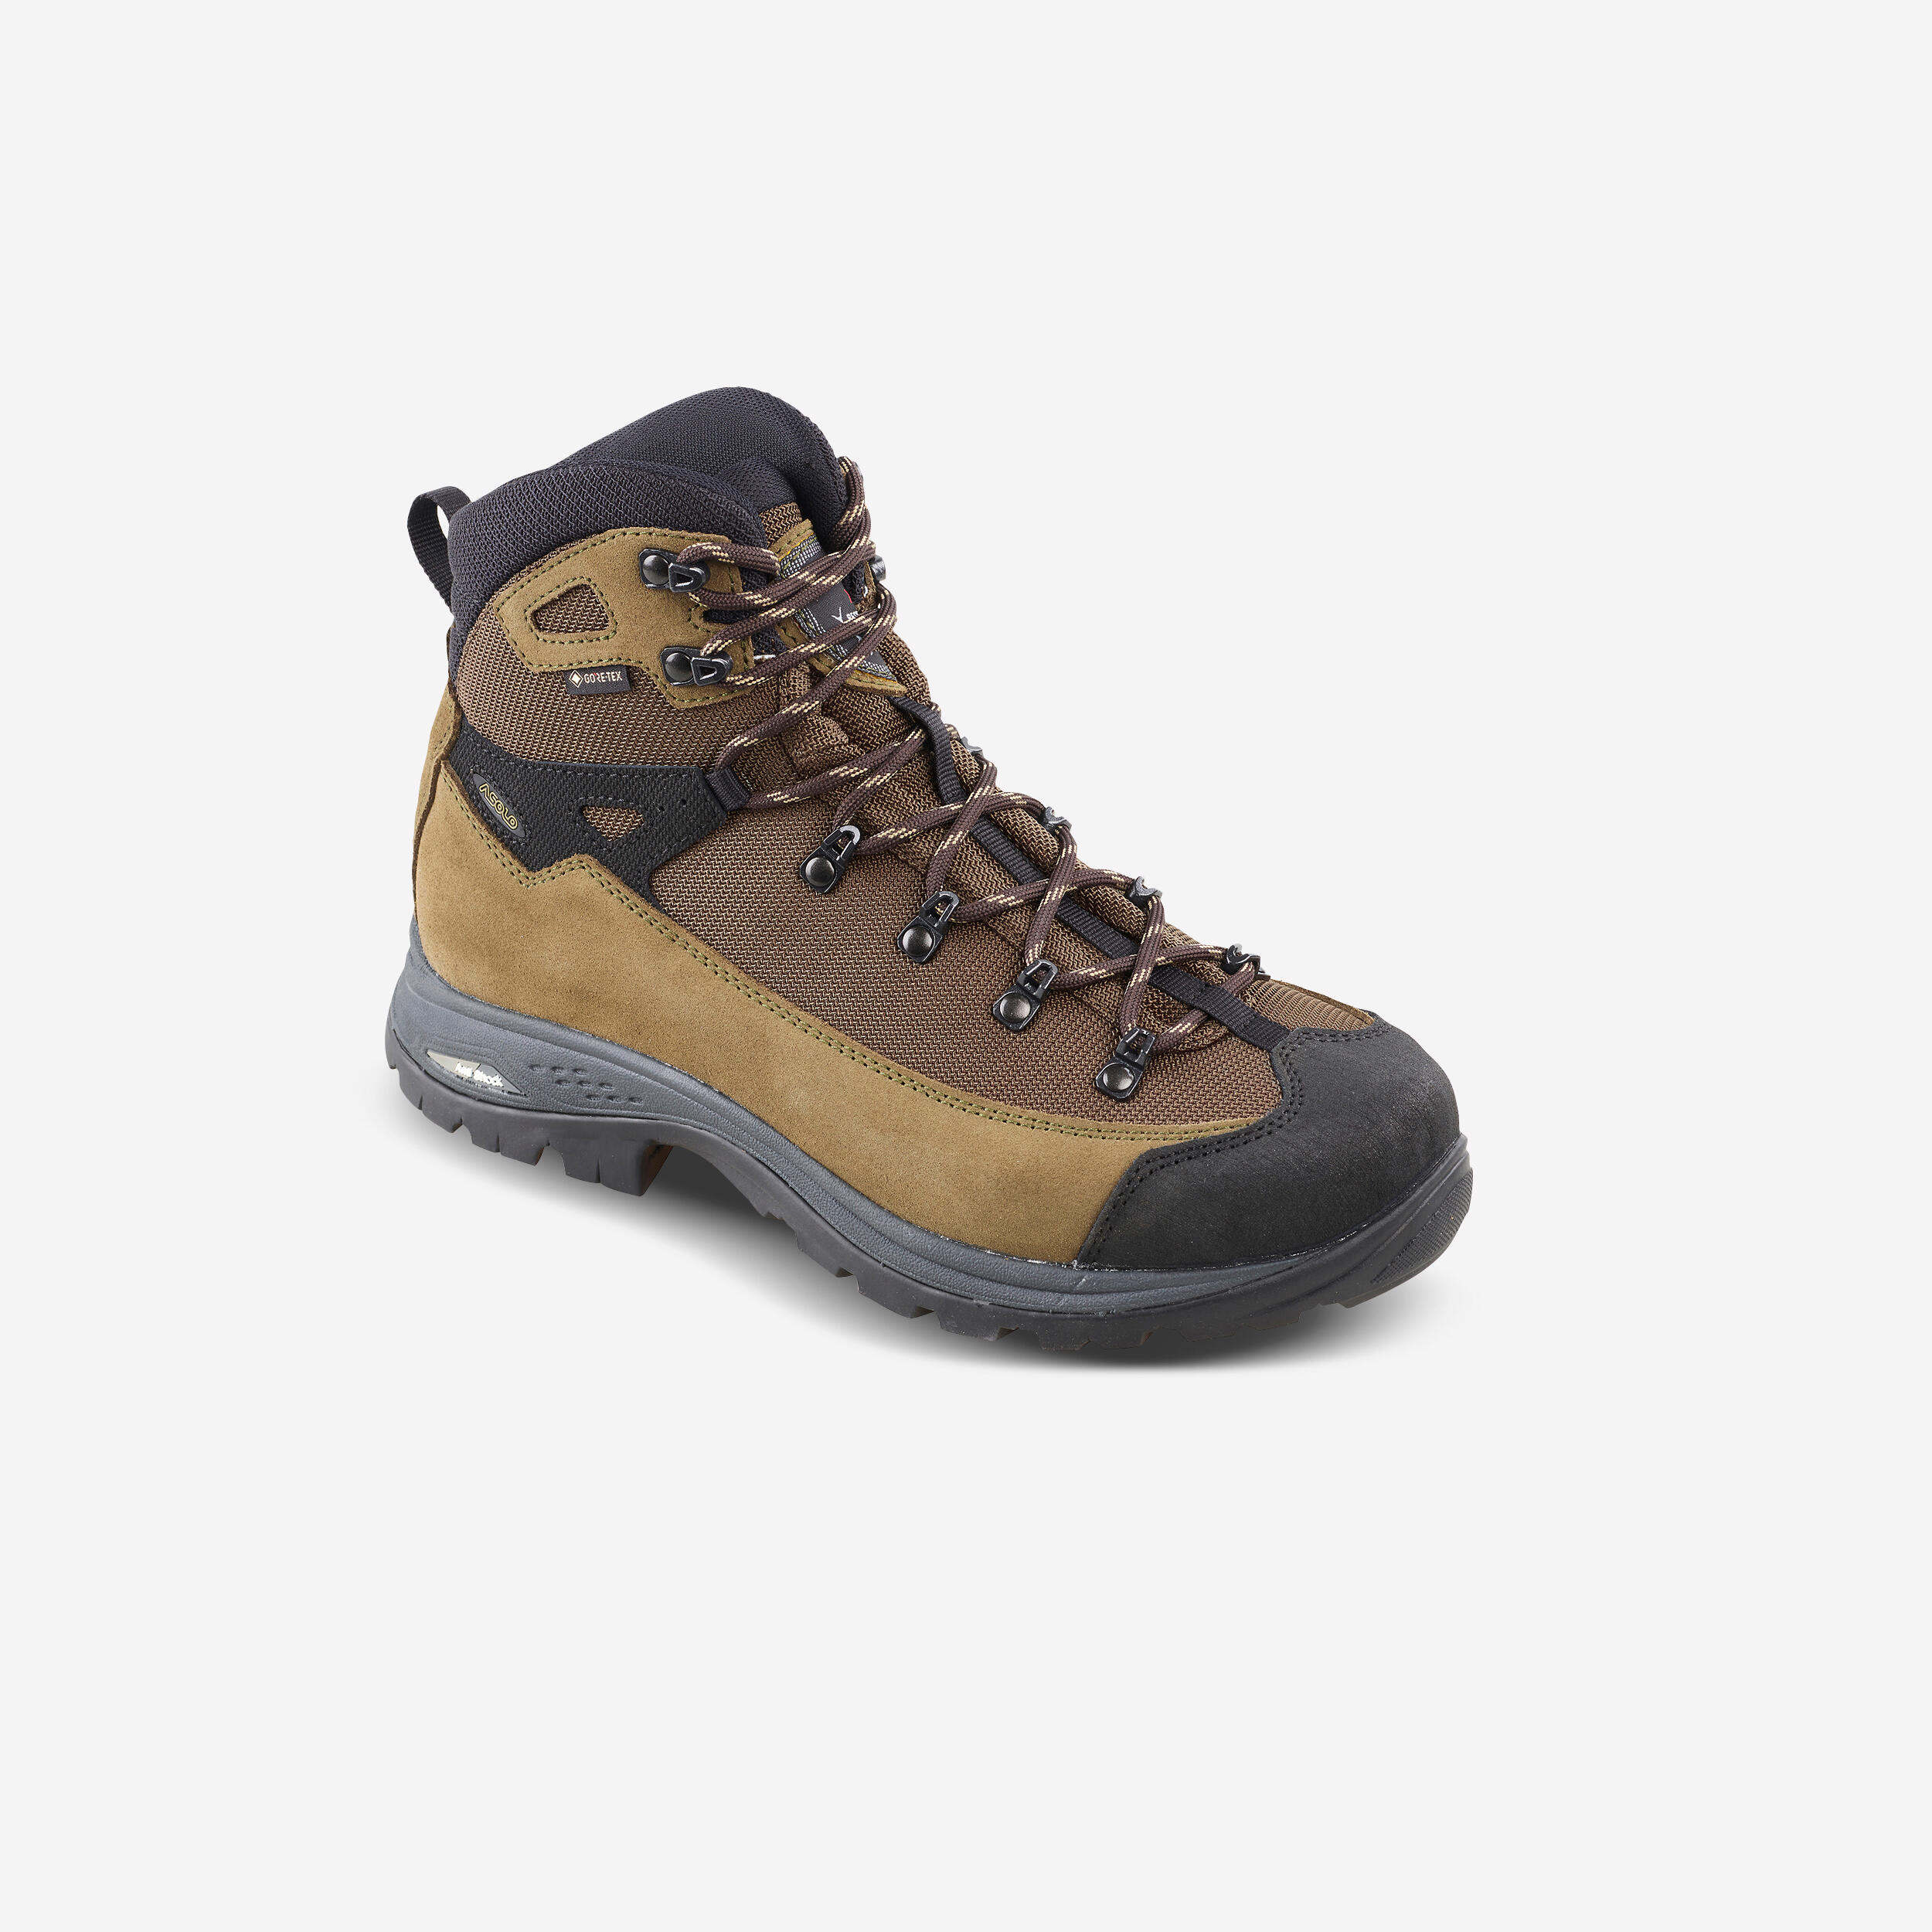 ASOLO Waterproof Country Sport Boots Asolo X-Hunt Land Gore-Tex Vibram